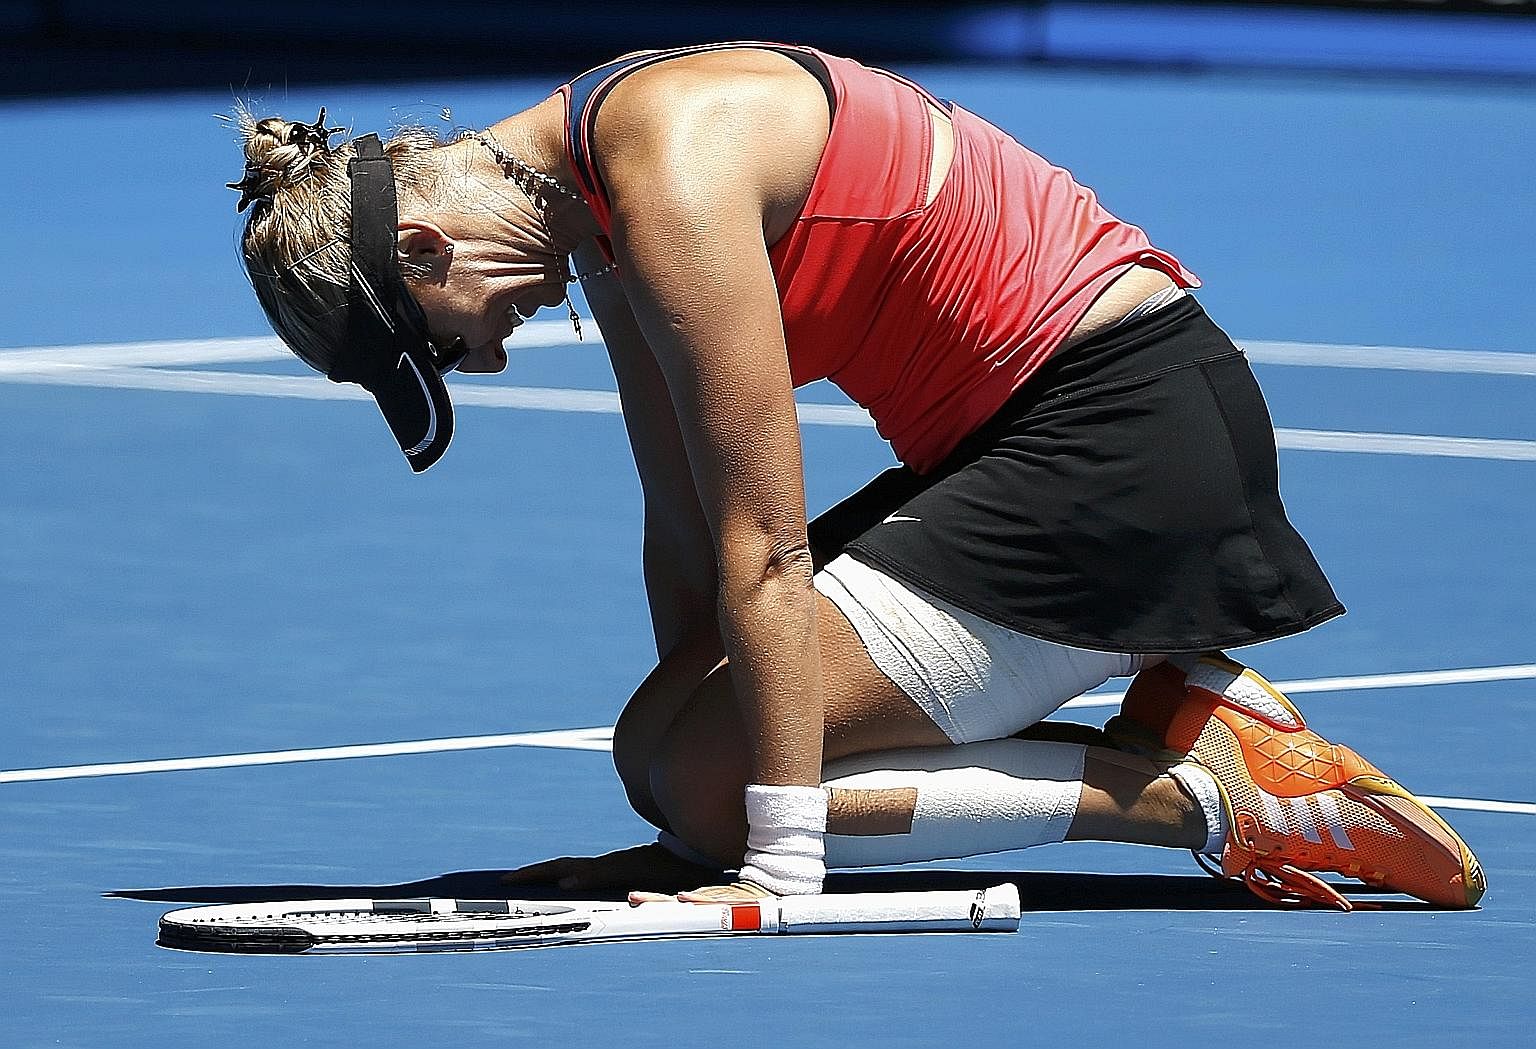 Mirjana Lucic-Baroni, the world No. 79, is overcome by emotion after her 6-4, 3-6, 6-4 Australian Open victory against Karolina Pliskova in the quarter-finals yesterday.